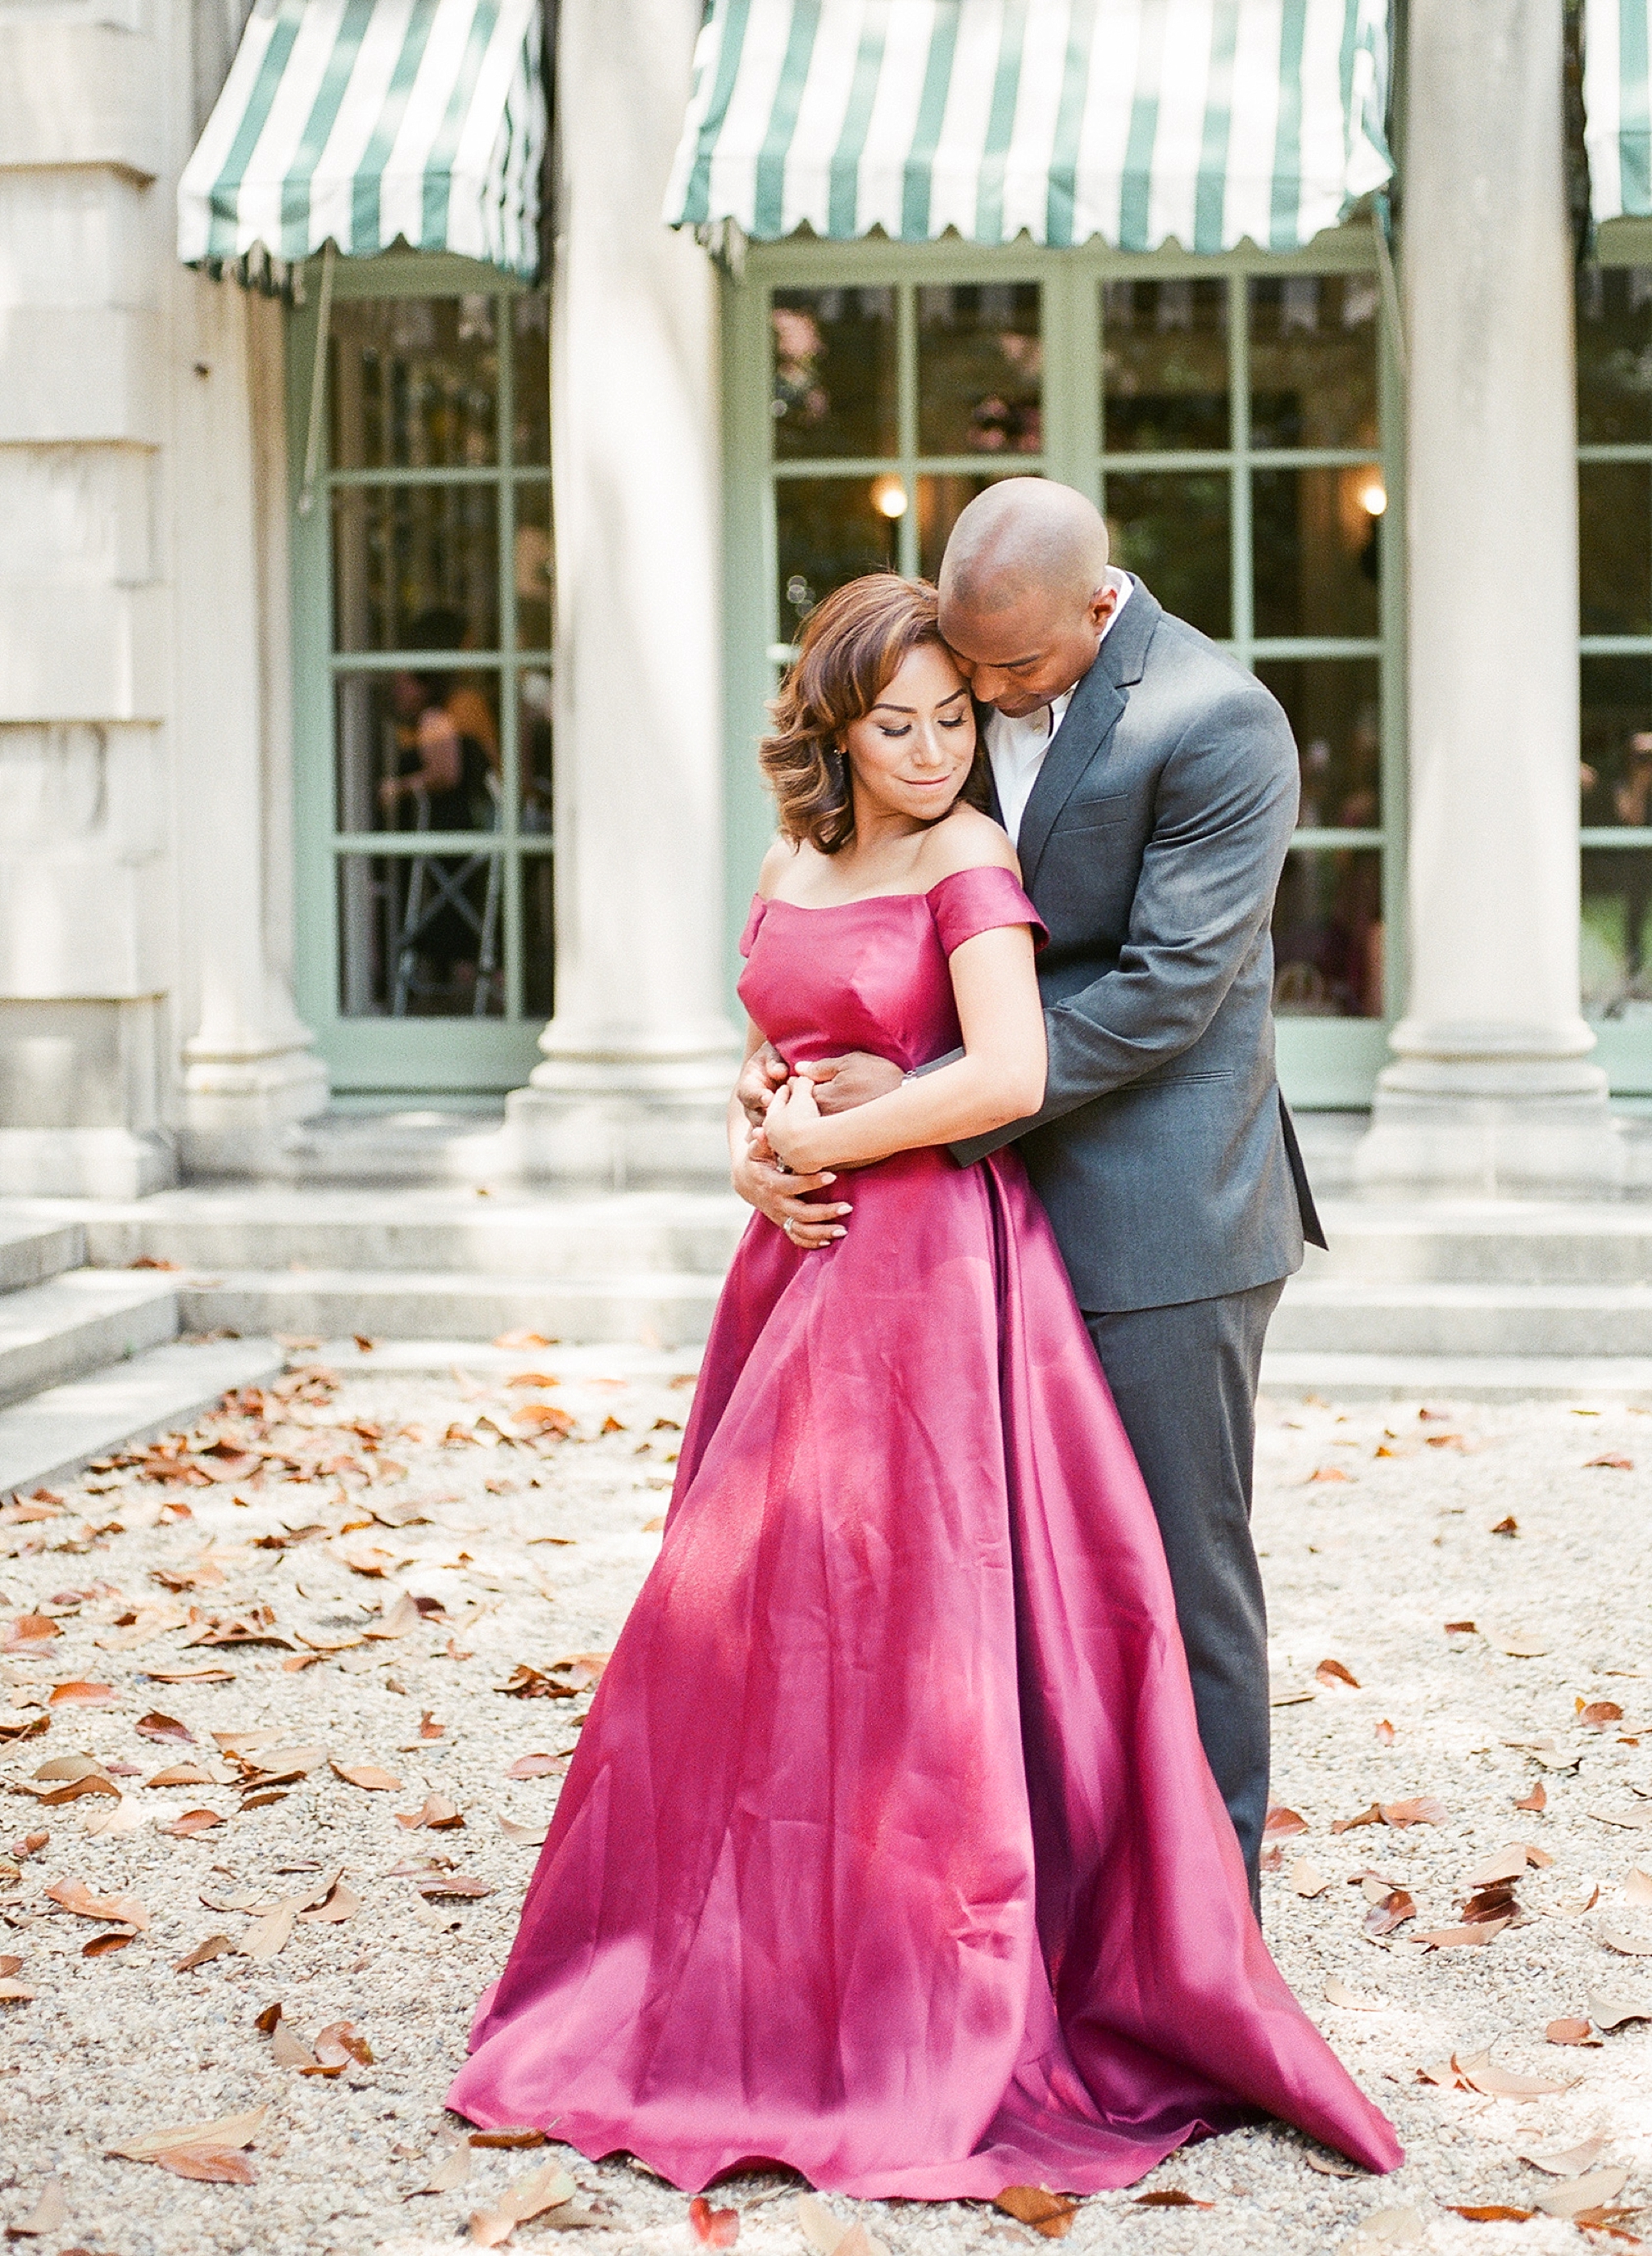 This chic anniversary session was photographed at the Anderson House in Washington, DC by film photographer Alicia Lacey.